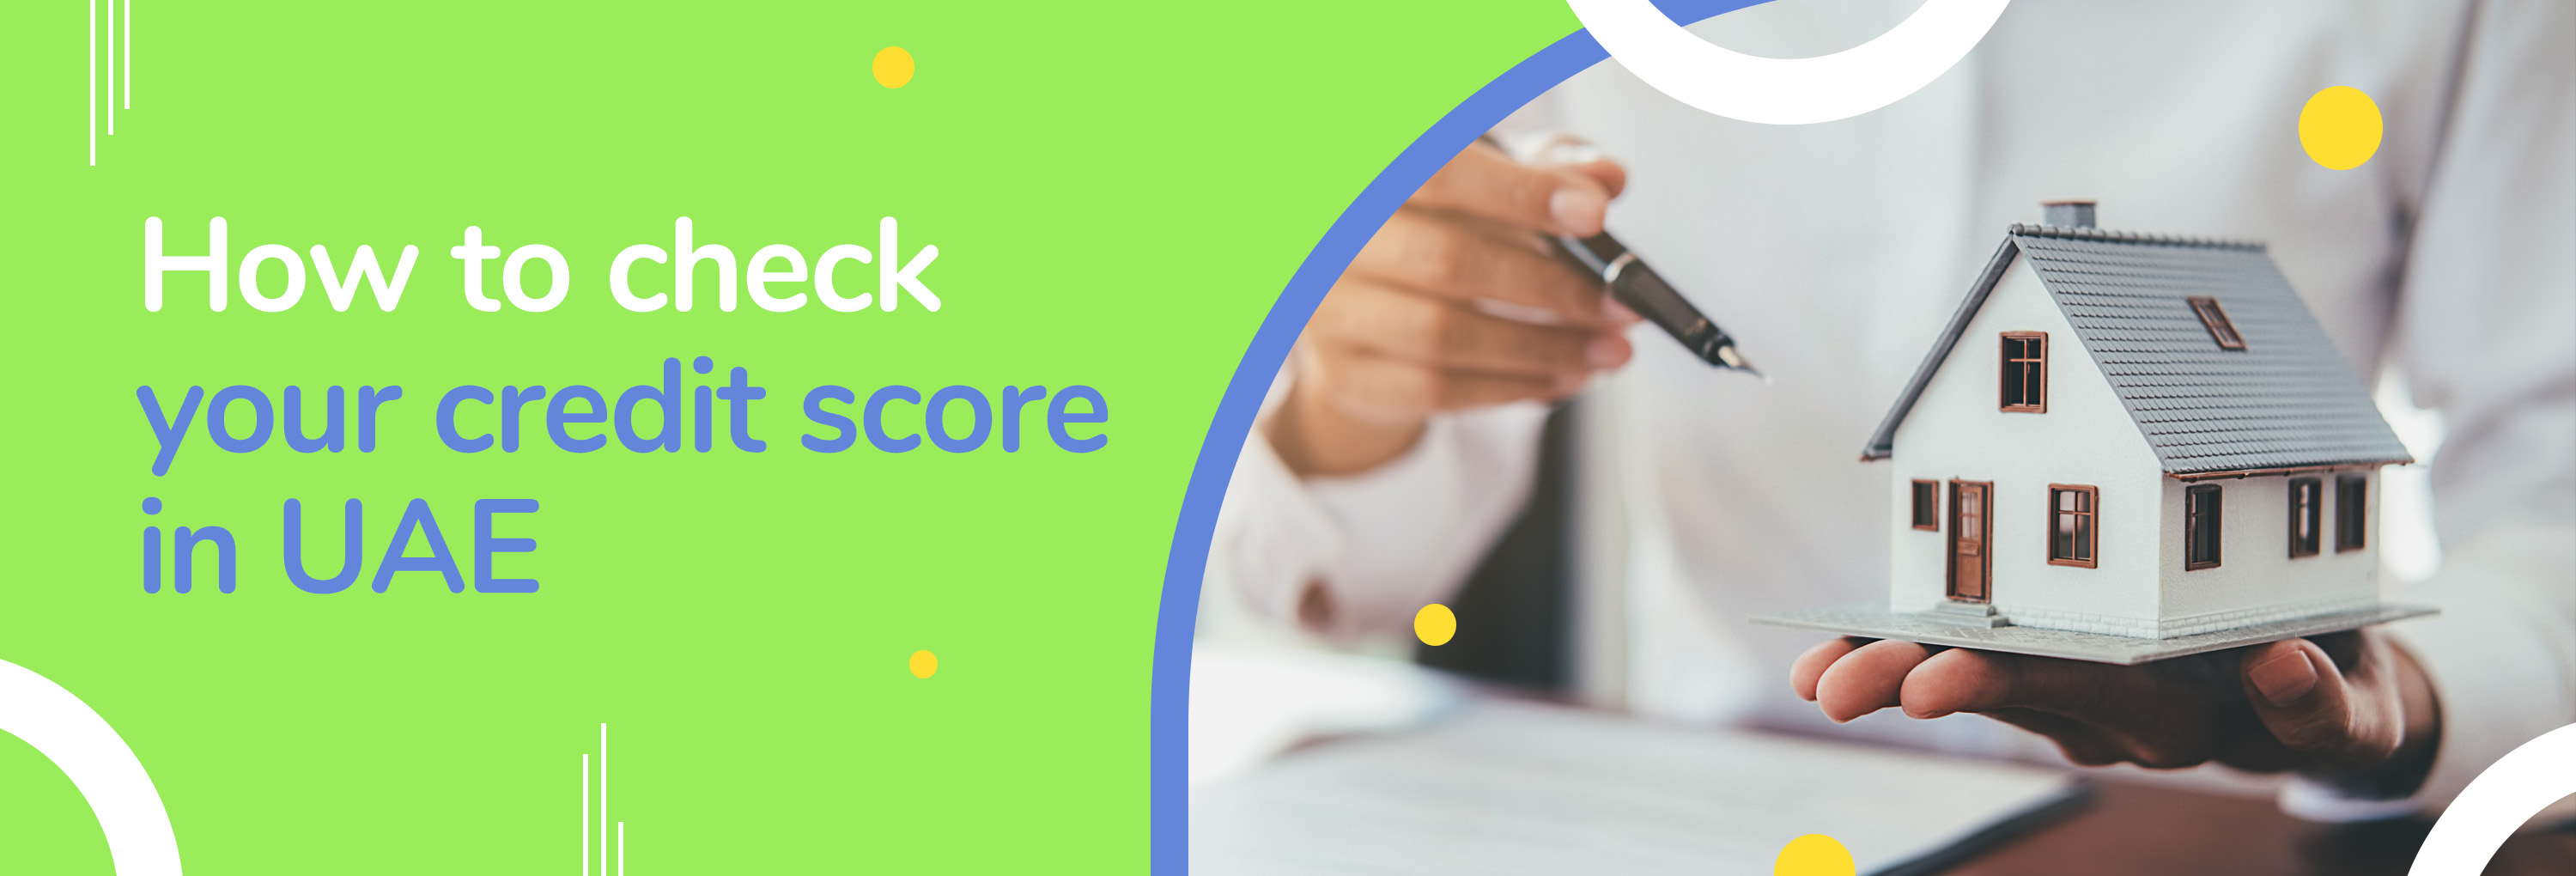 How to check your credit score in UAE